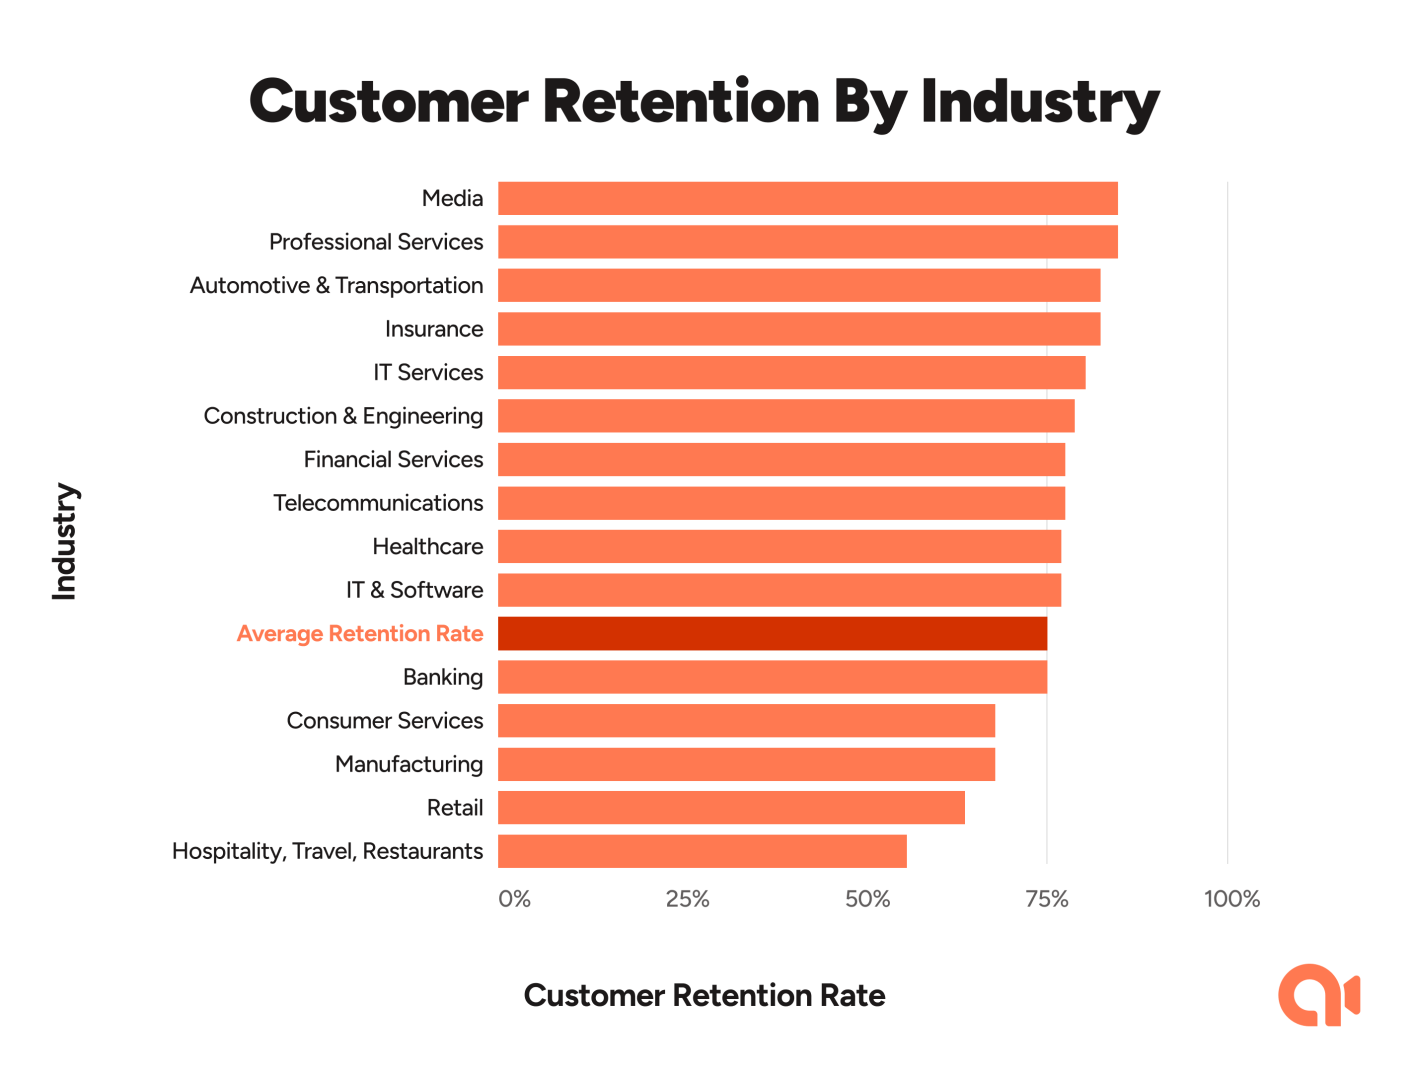 Customer Retention by Industry graph